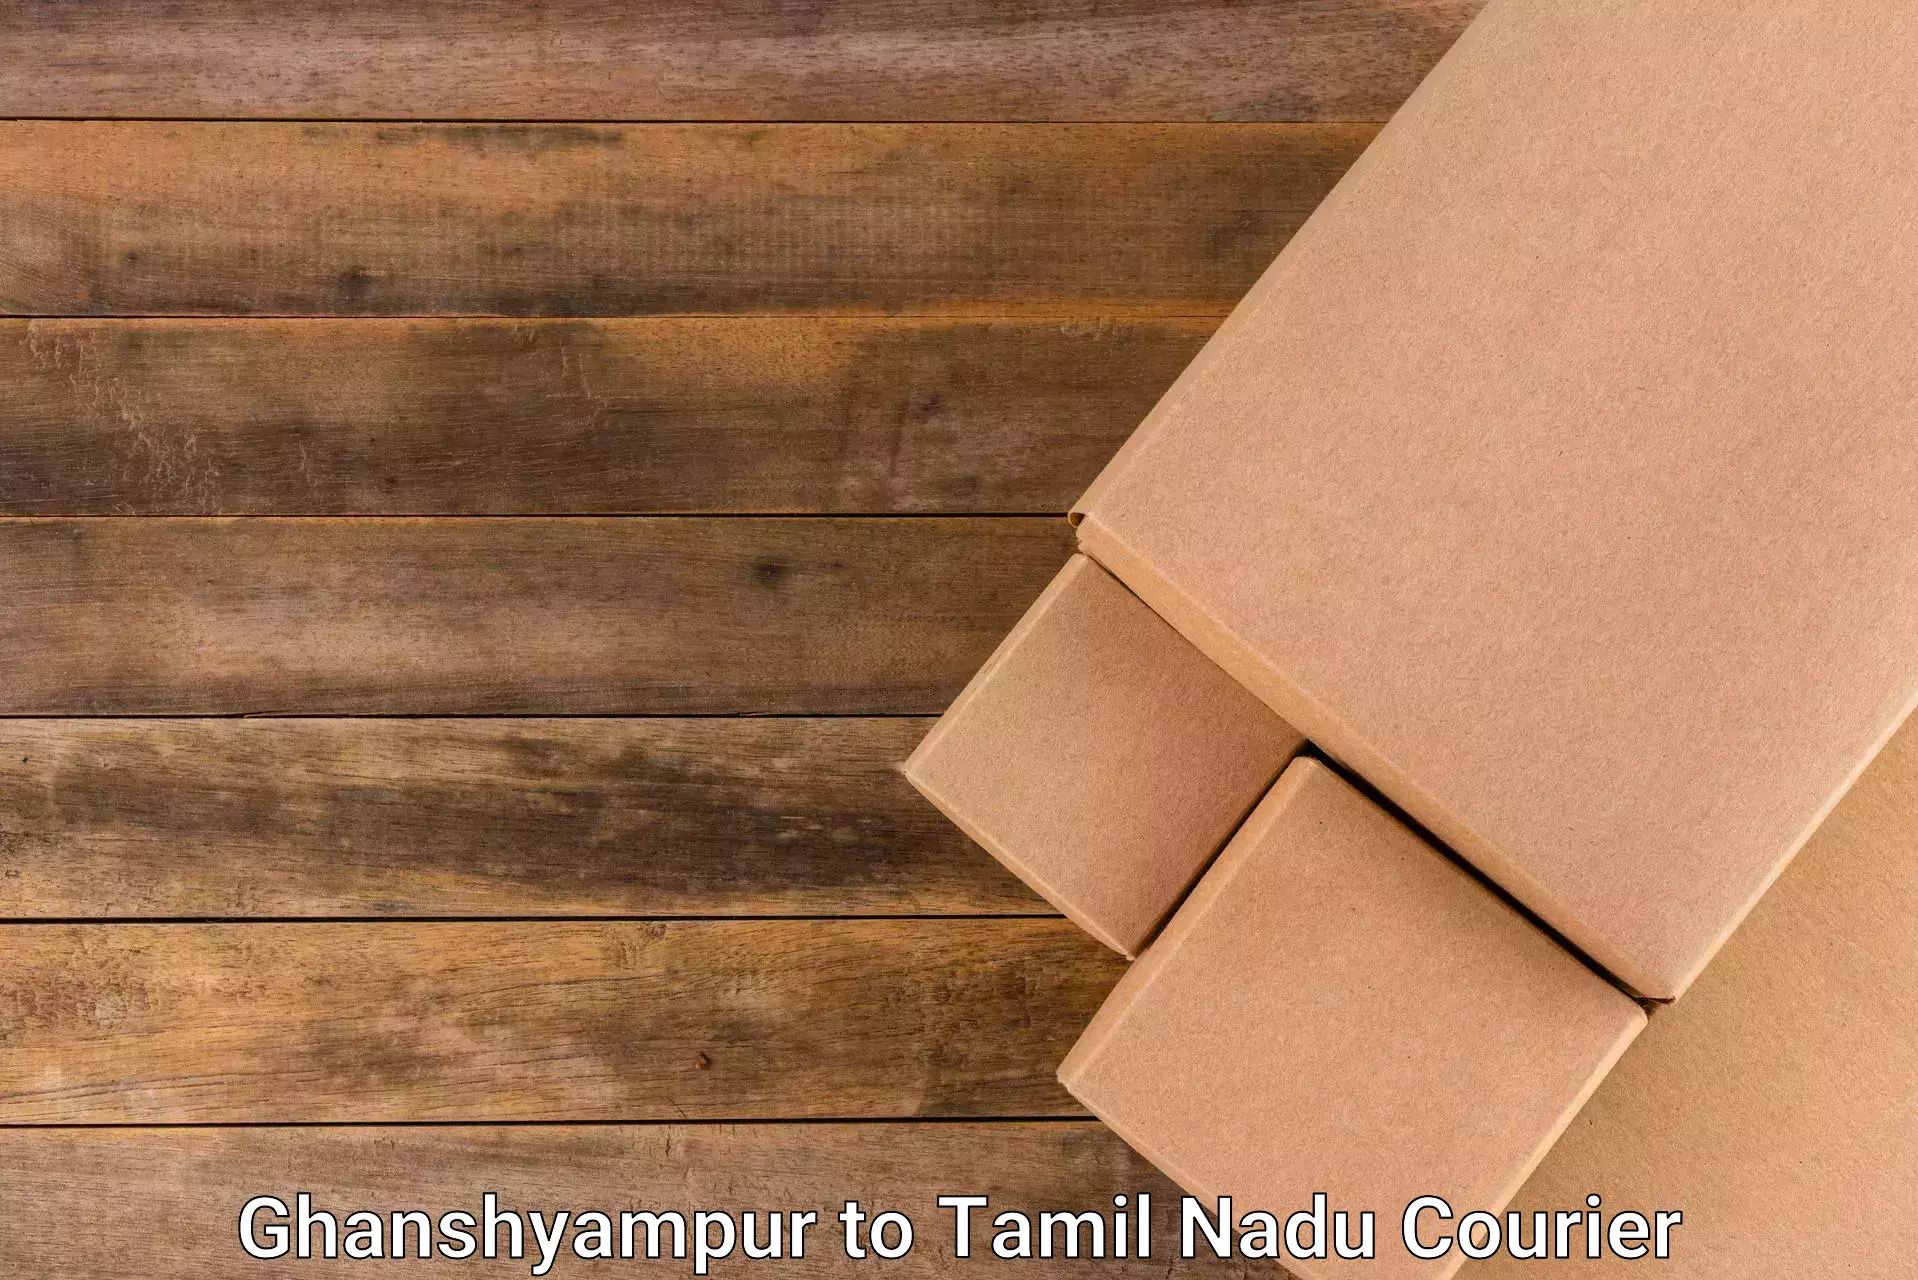 Special handling courier Ghanshyampur to Chidambaram